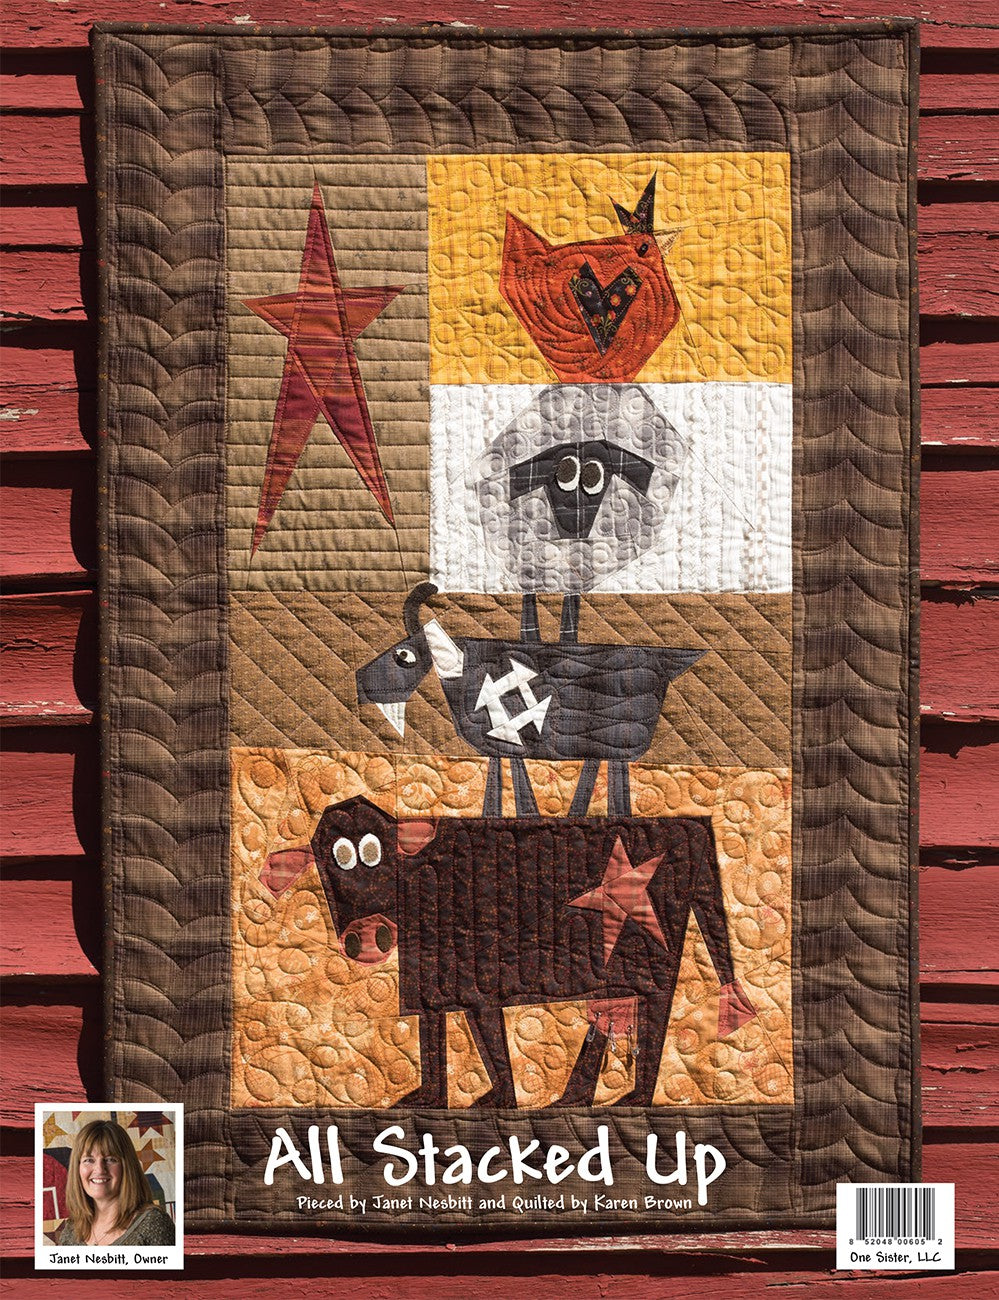 Udder-ly Crazy Quilt Pattern Book by Janet Nesbitt of One Sister Designs